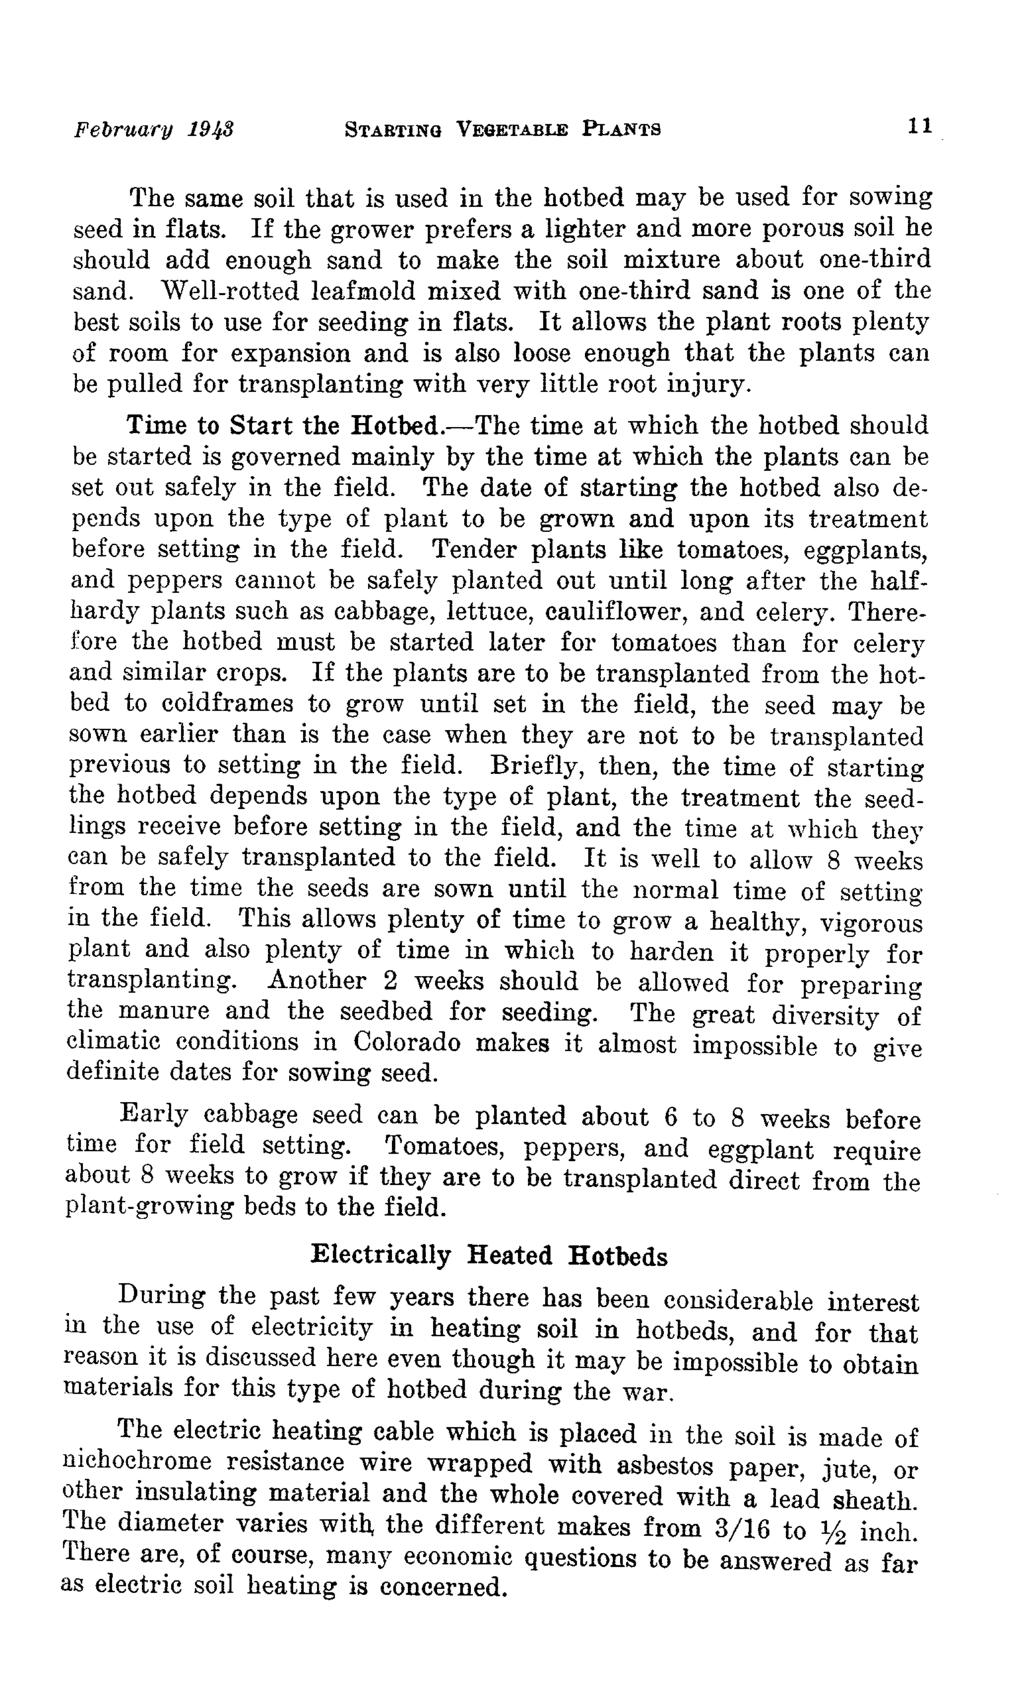 February 1948 STARTING VEGETABLE PLANTS 11 The same soil that is used in the hotbed may be used for sowing seed in flats.